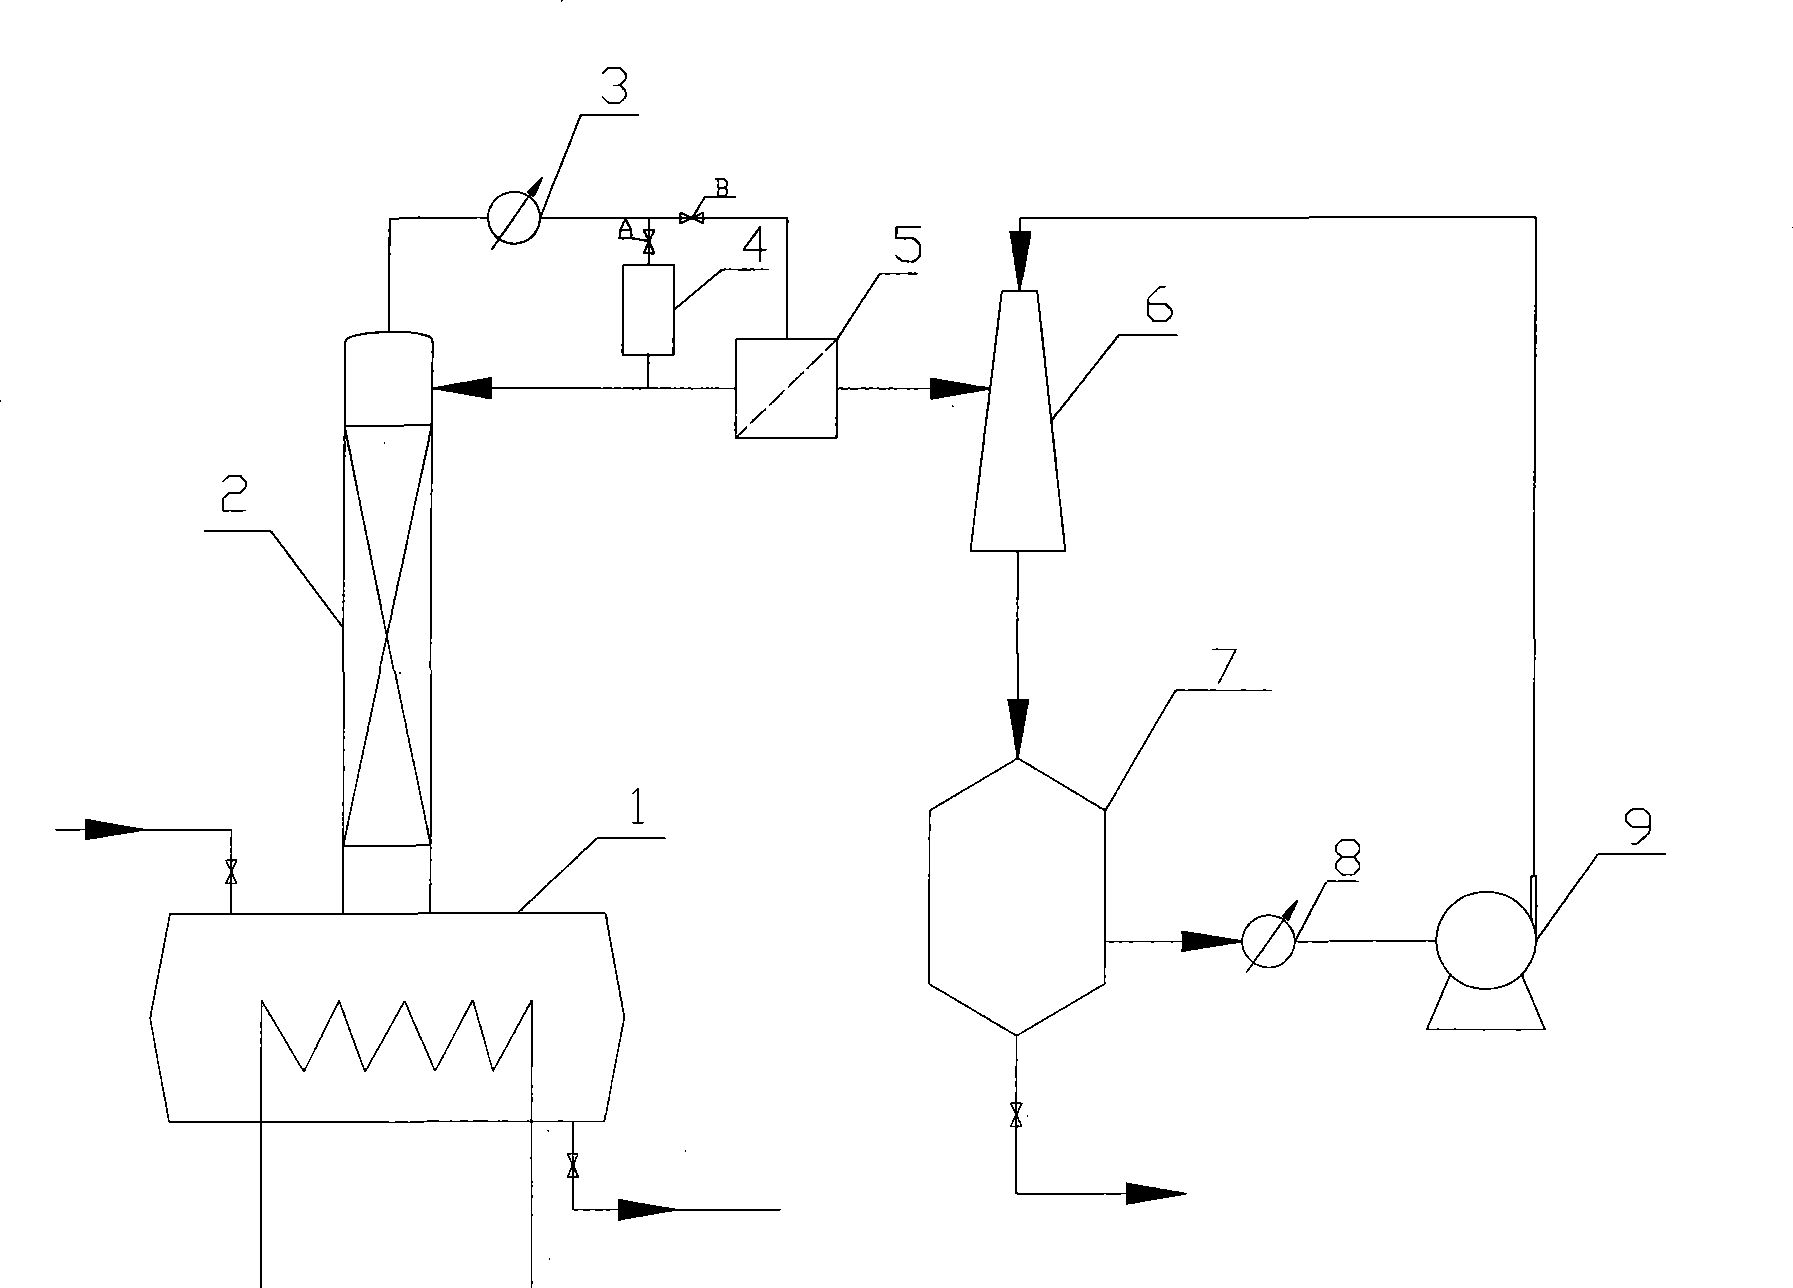 Apparatus and method for separating tert-butanol and water using batch fractionating and pervaporation